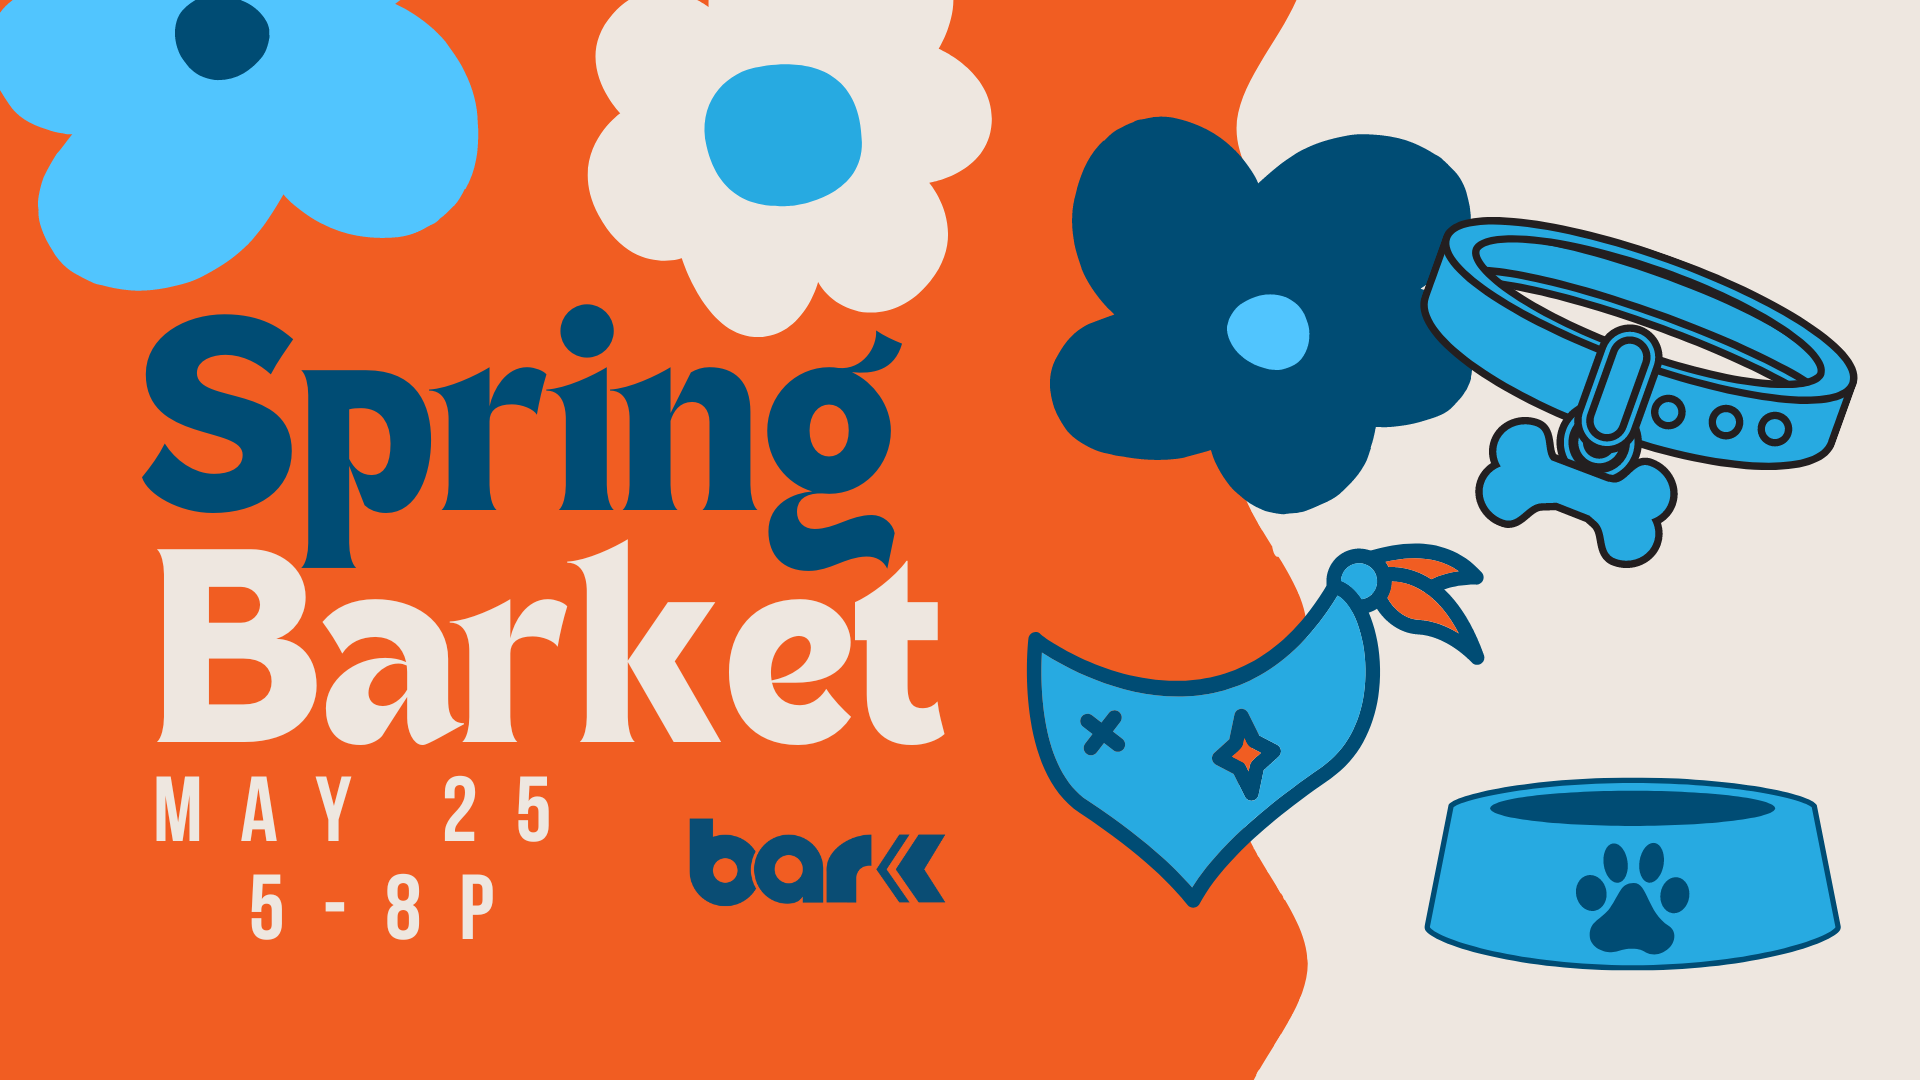 Spring Barket on may 25th from 5 to 8 pm.